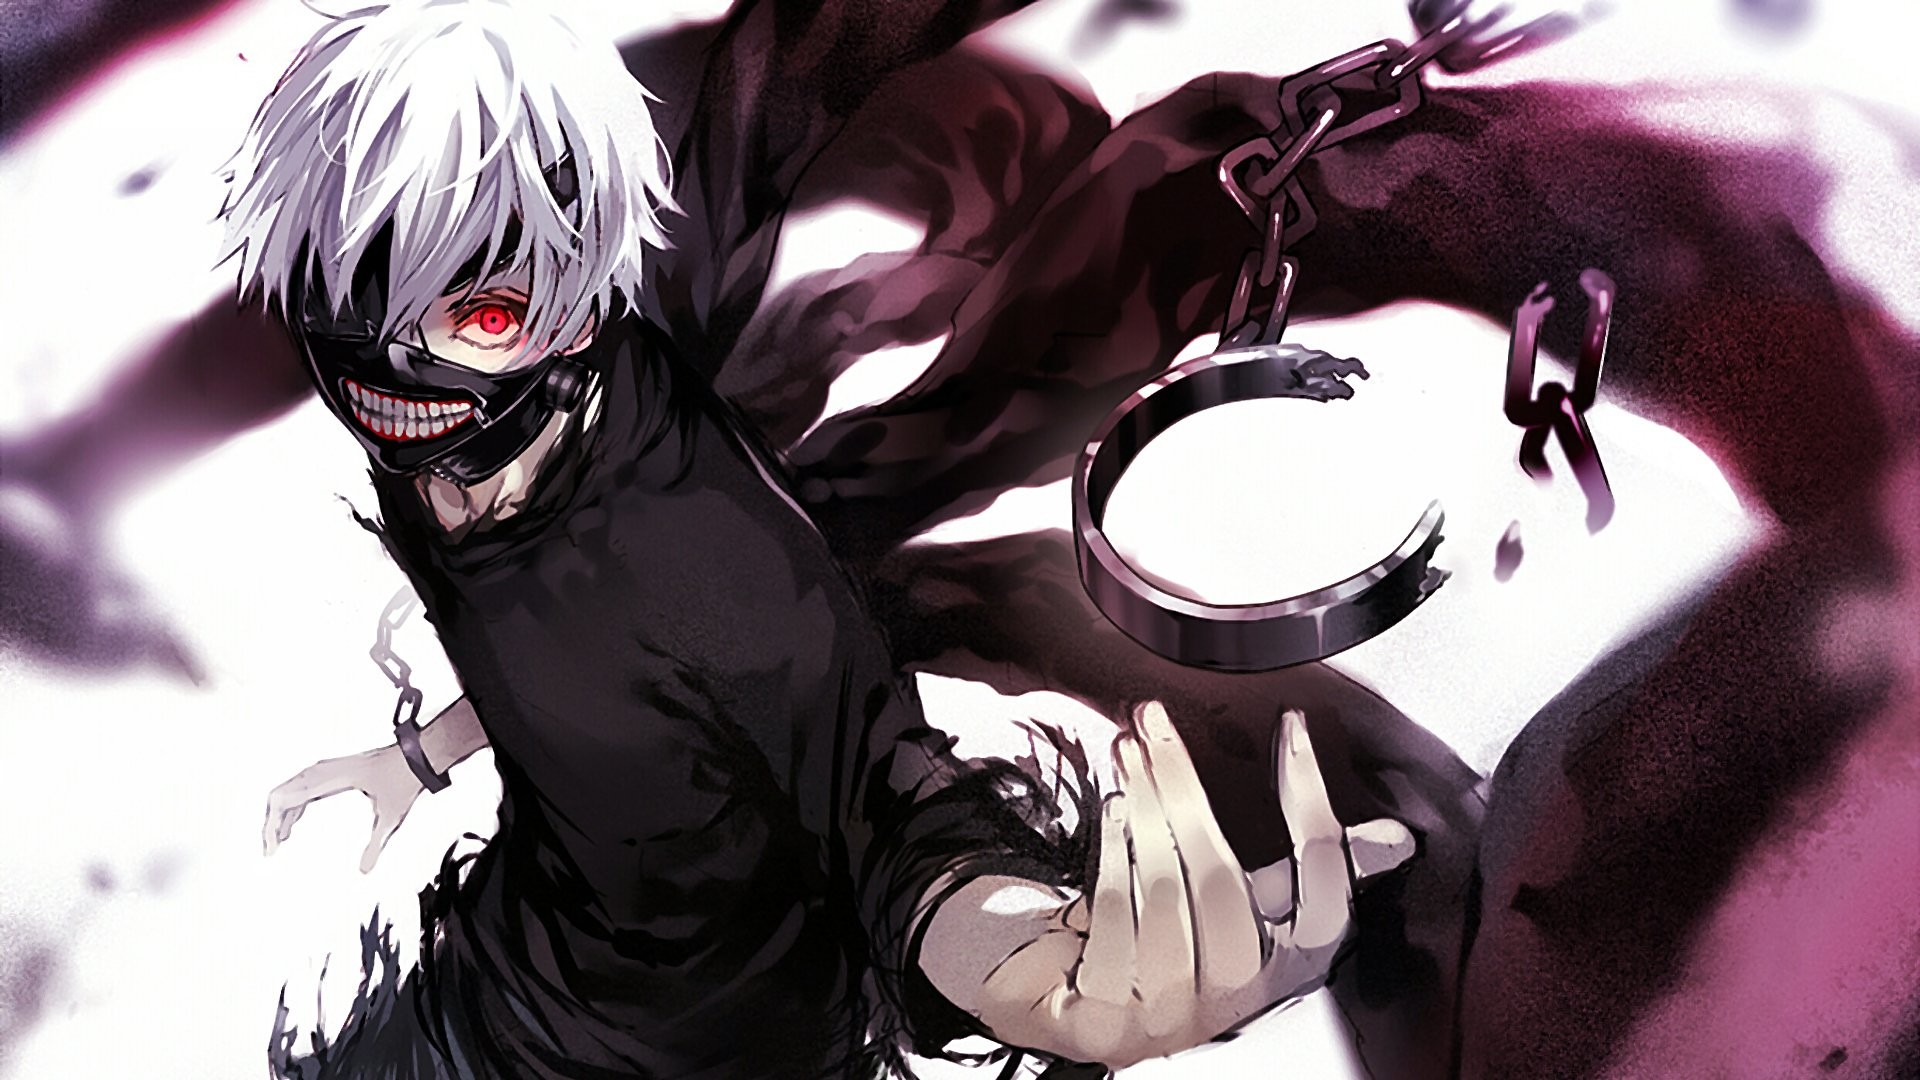 HD Wallpaper Background ID522622. Anime Tokyo Ghoul